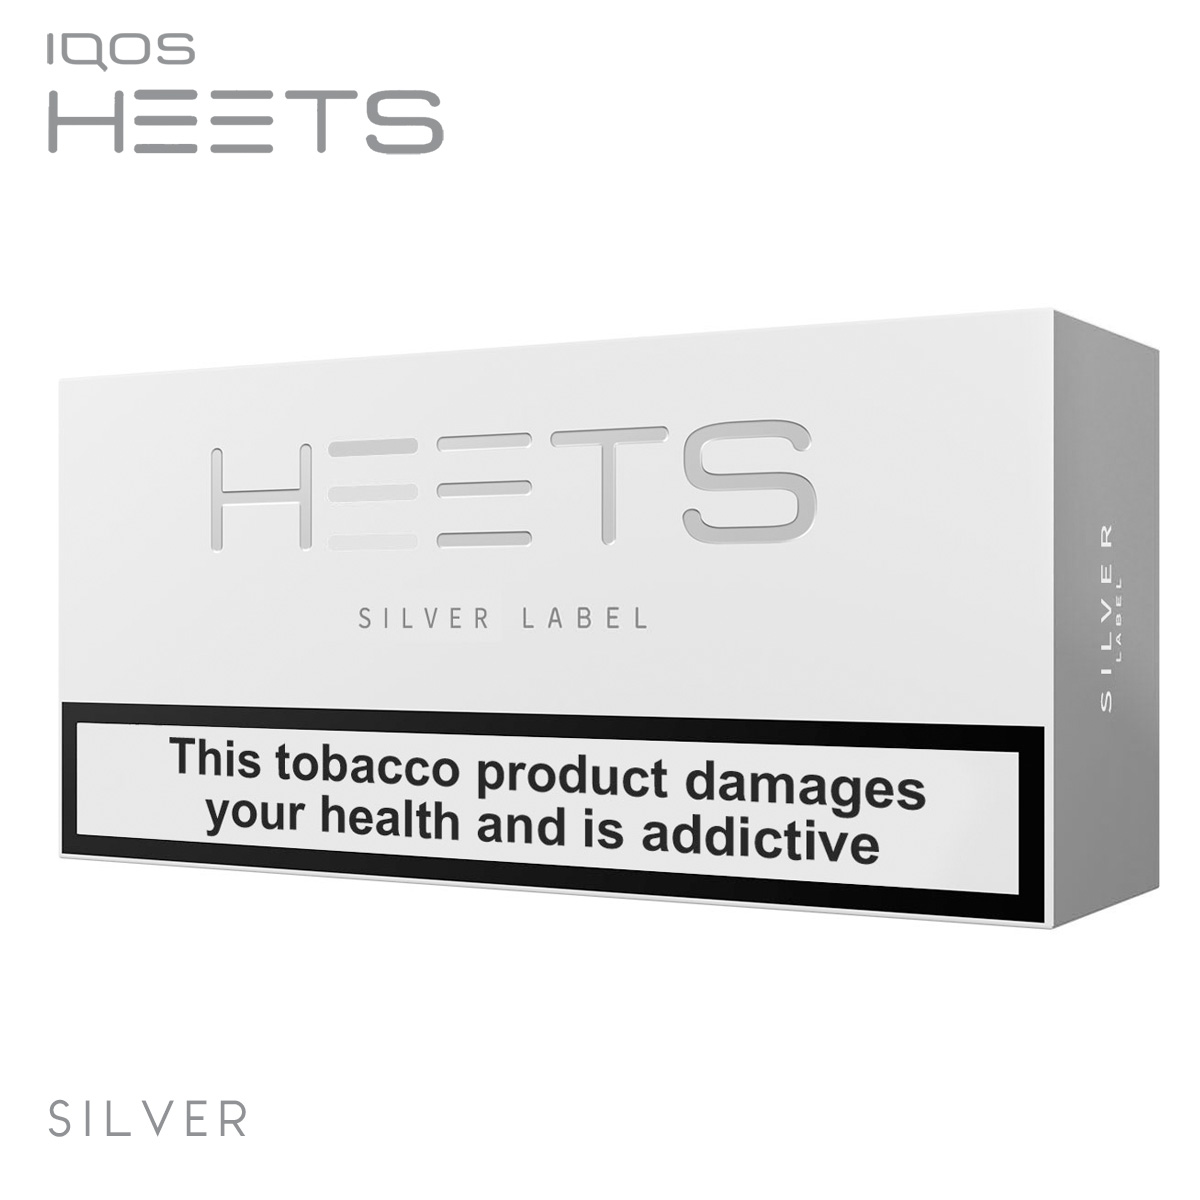 IQOS Heets Silver